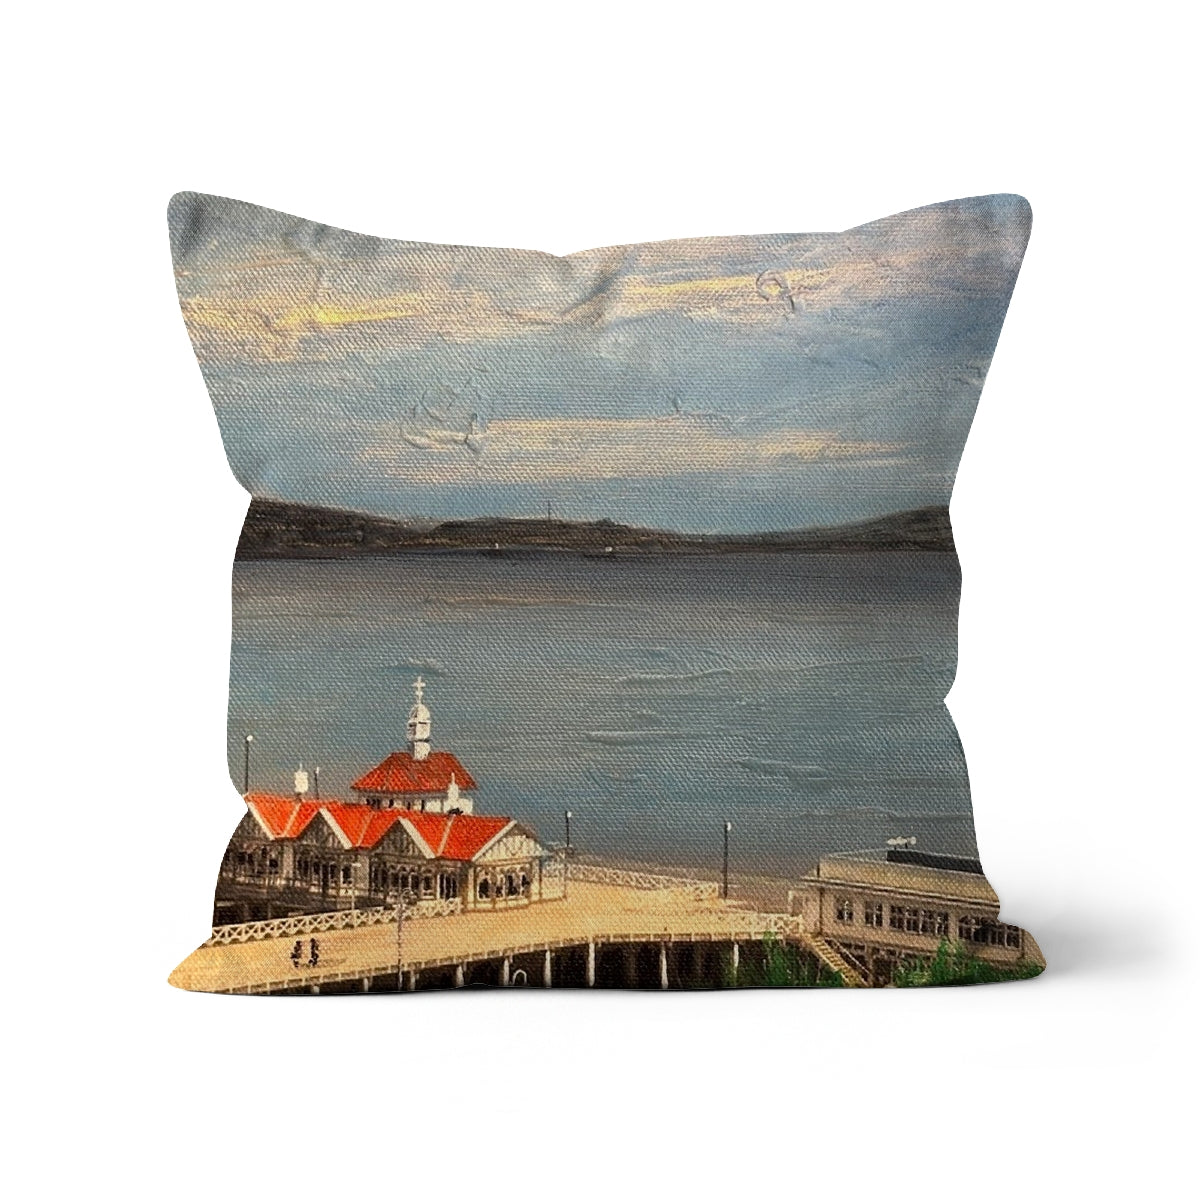 Looking From Dunoon Art Gifts Cushion-Cushions-River Clyde Art Gallery-Faux Suede-24"x24"-Paintings, Prints, Homeware, Art Gifts From Scotland By Scottish Artist Kevin Hunter